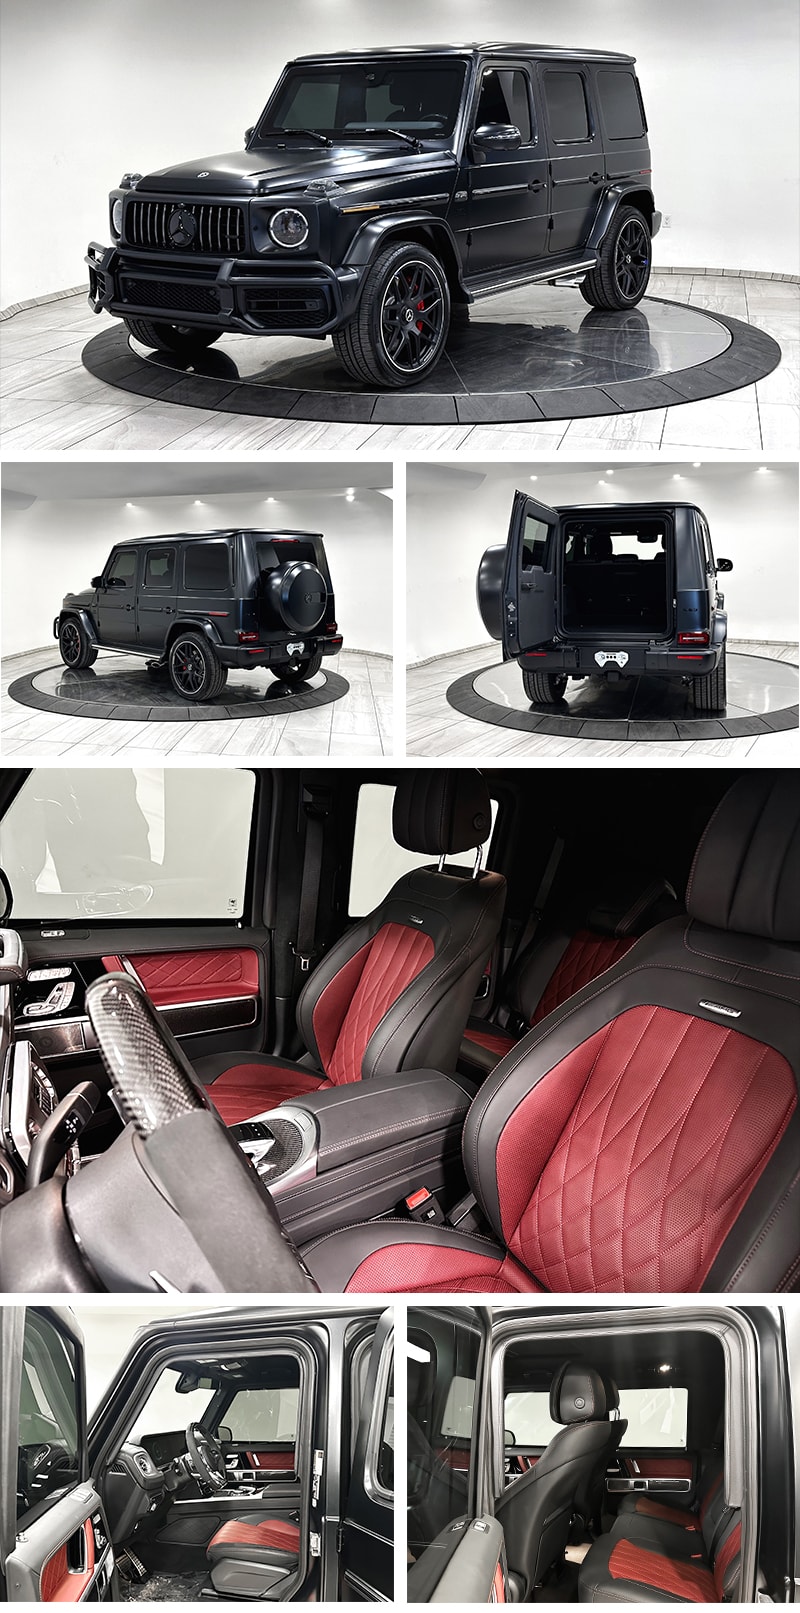 Special Armored Offer - 1 x Brand New Mercedes Benz G63 AMG 